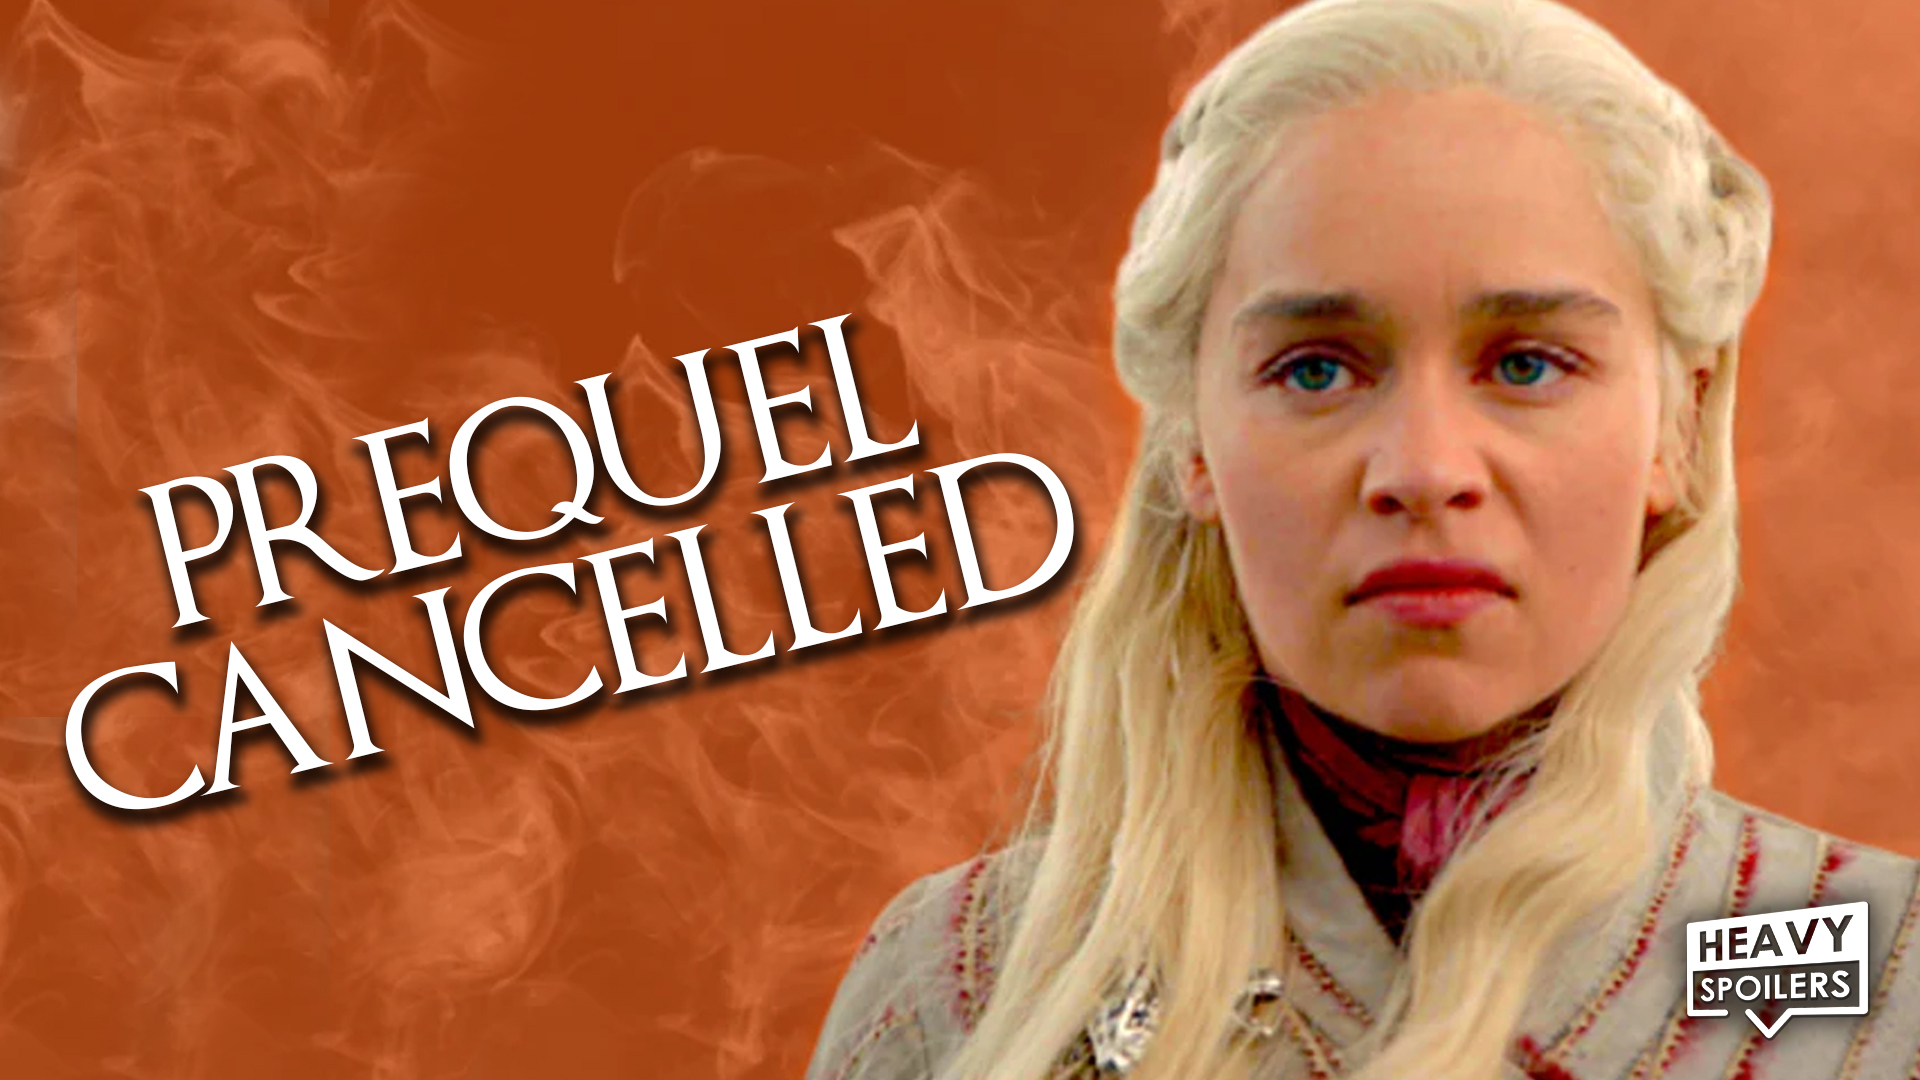 game of thrones bloodmoon prequel cancelled house of dragons announced and confirmed by hbo for new streaming service